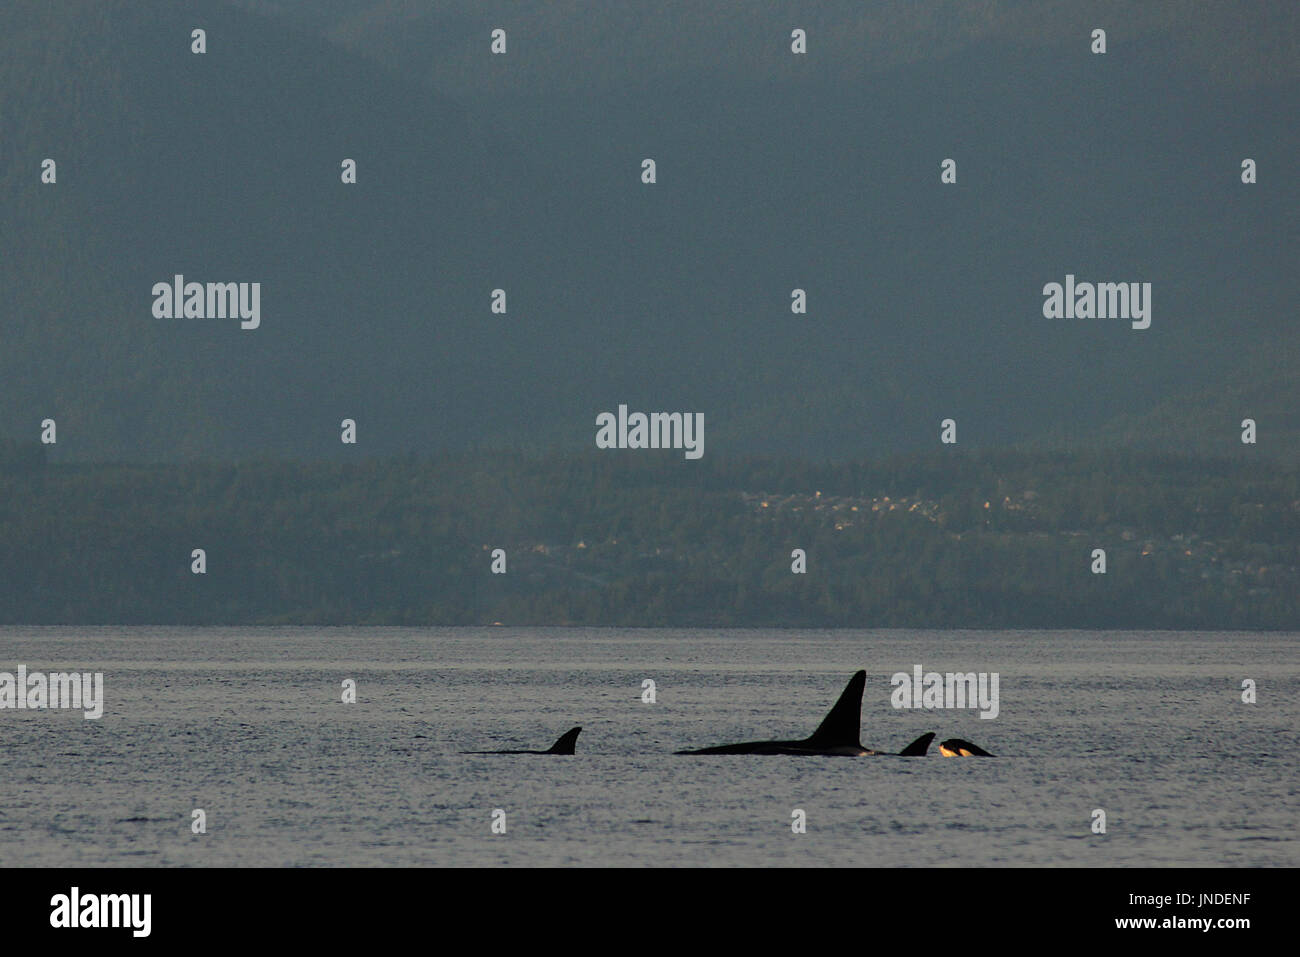 A family of transient Orca killer whales swimming past Nanaimo in British Columbia, Canada Stock Photo